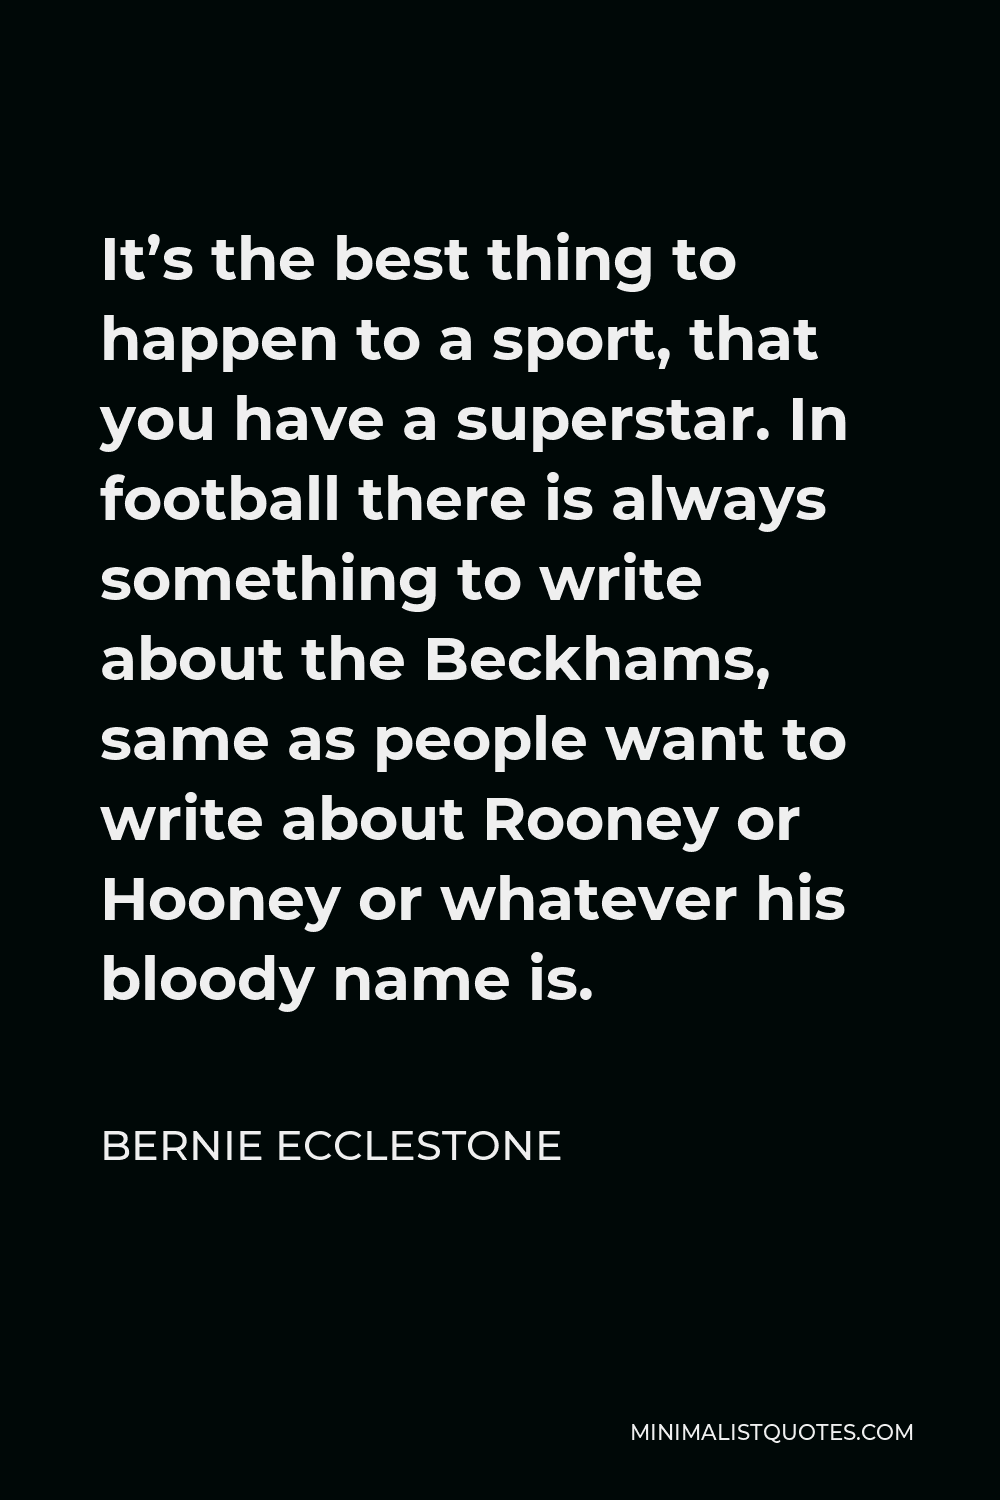 Bernie Ecclestone Quote - It’s the best thing to happen to a sport, that you have a superstar. In football there is always something to write about the Beckhams, same as people want to write about Rooney or Hooney or whatever his bloody name is.